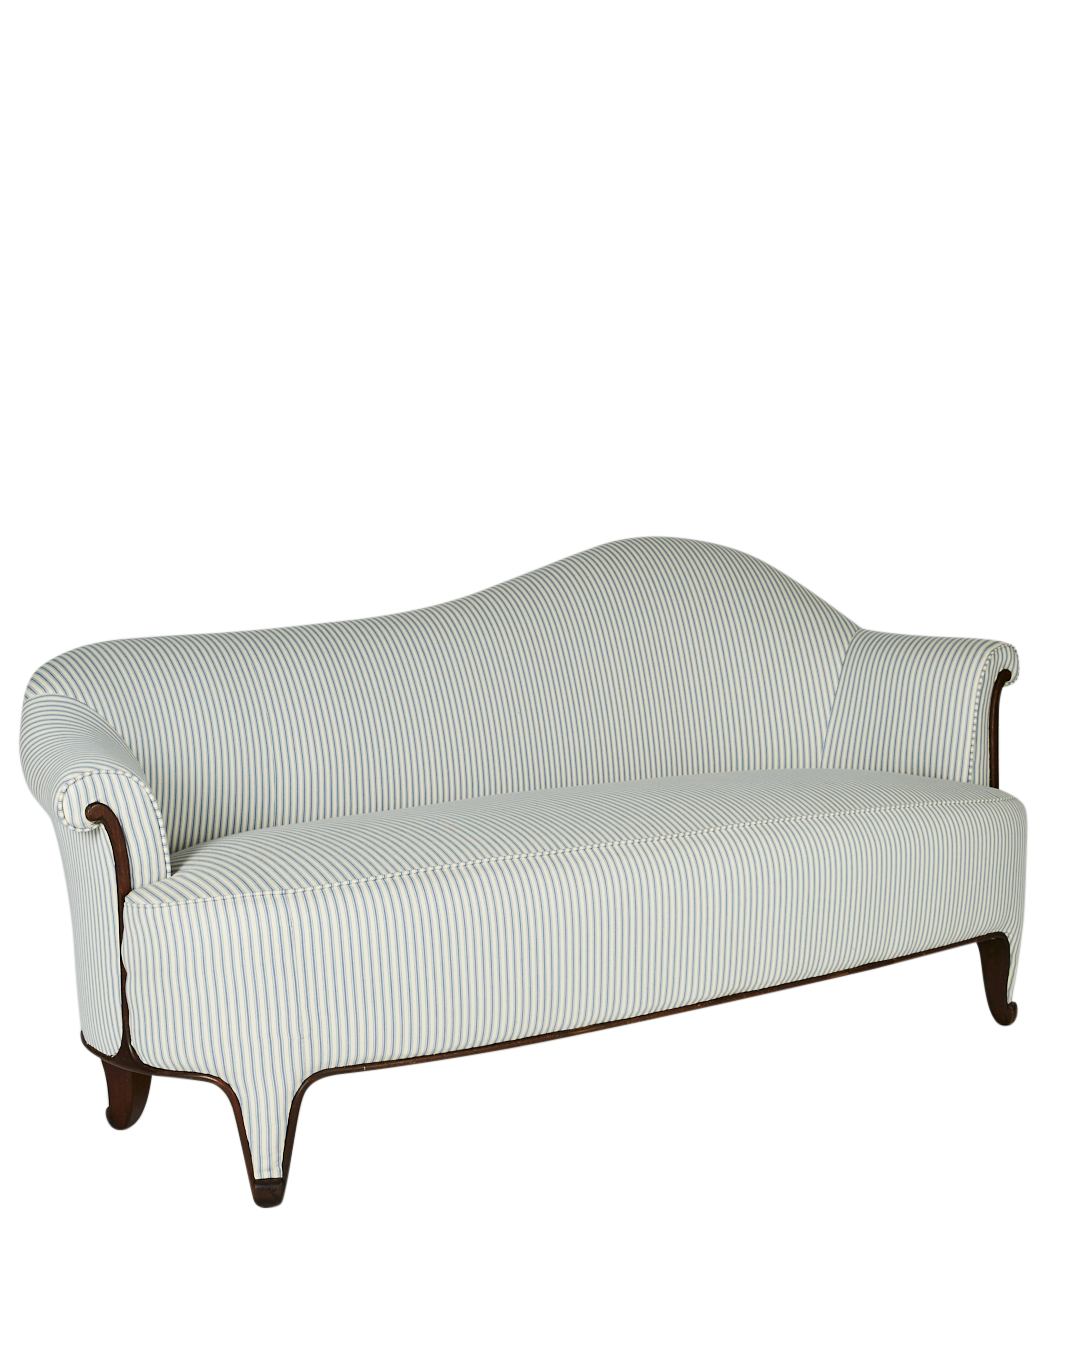 1930s Antique French Sofa